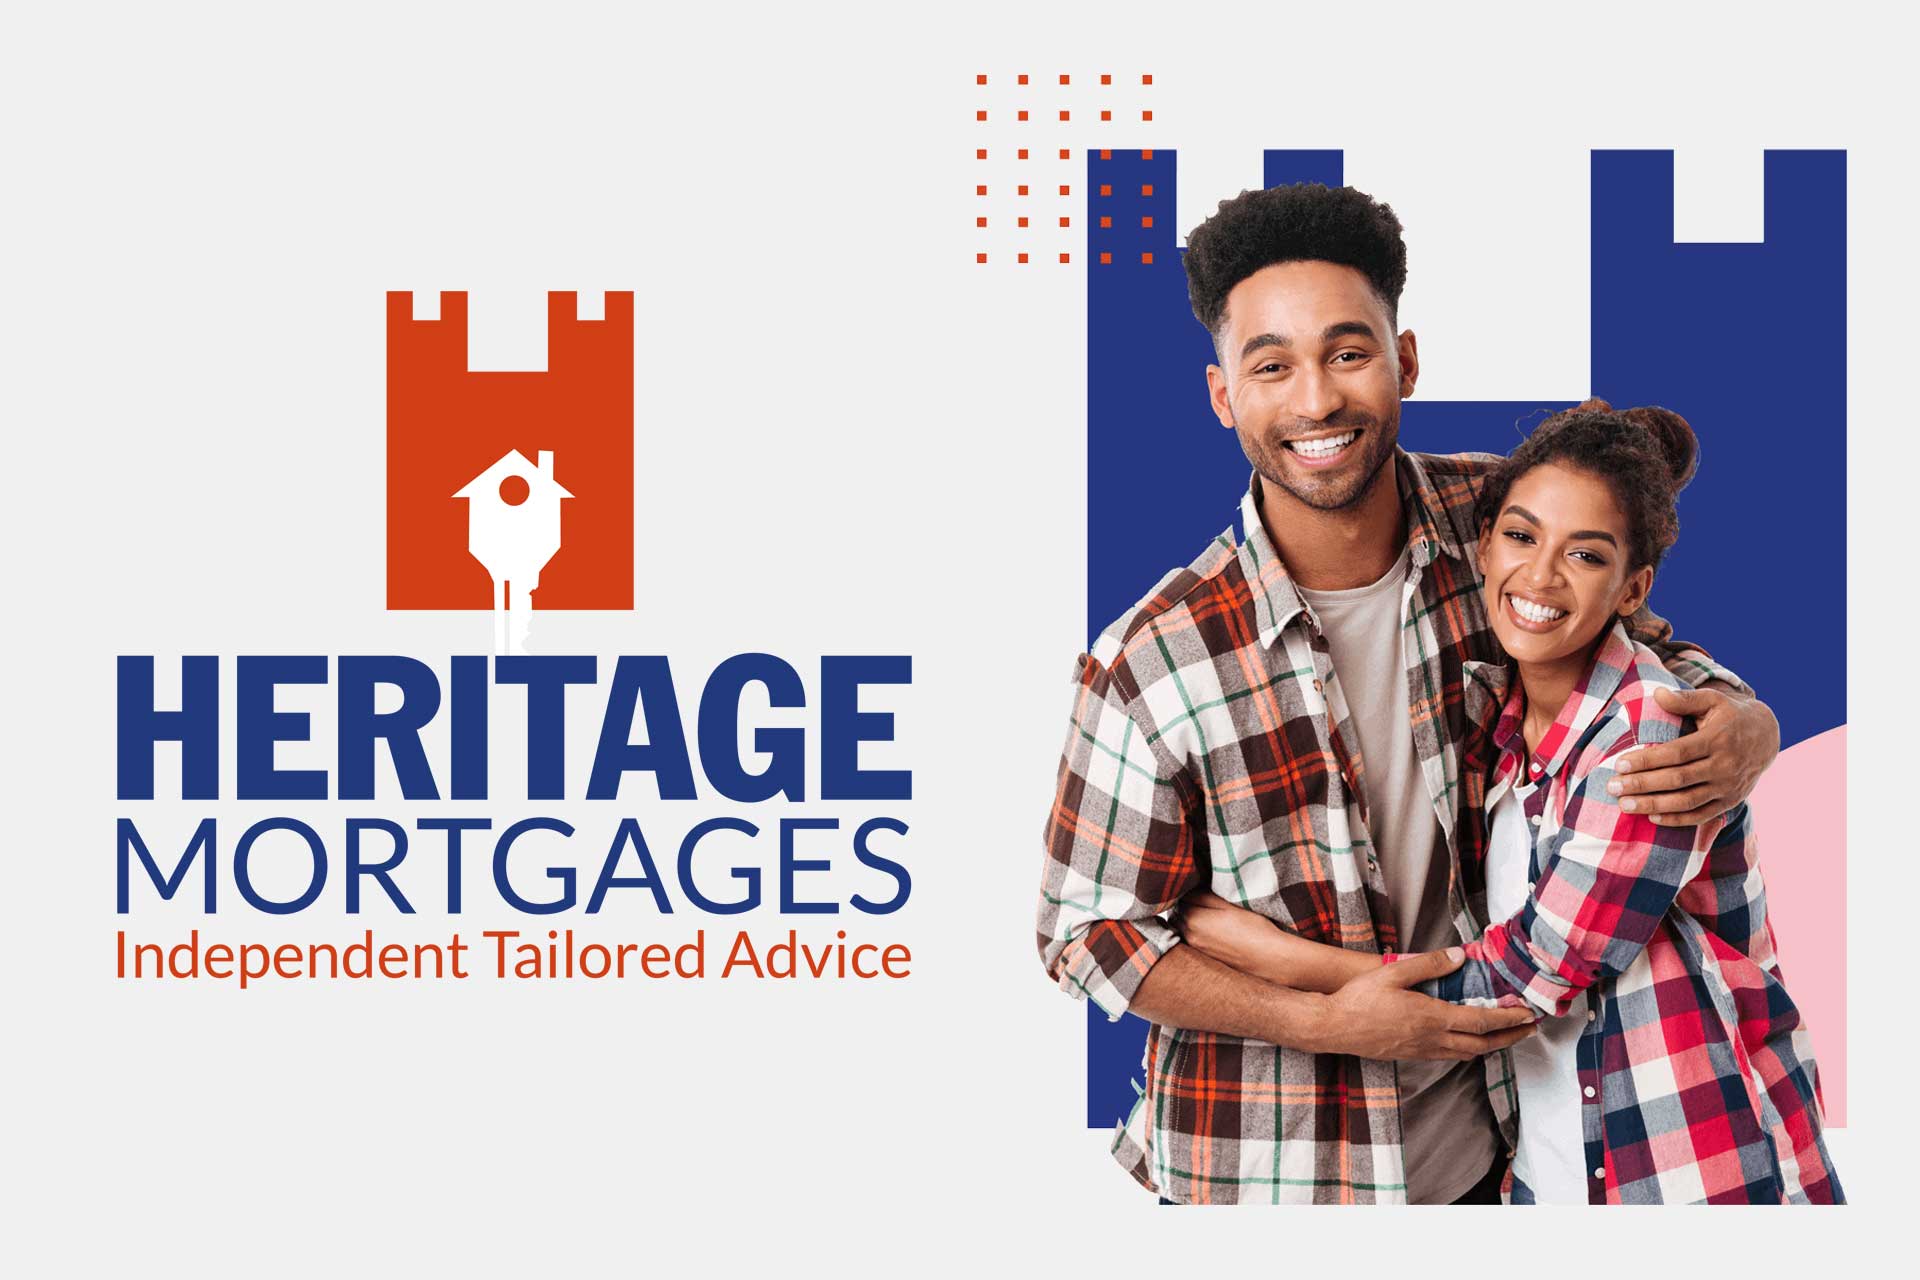 Heritage Mortgages